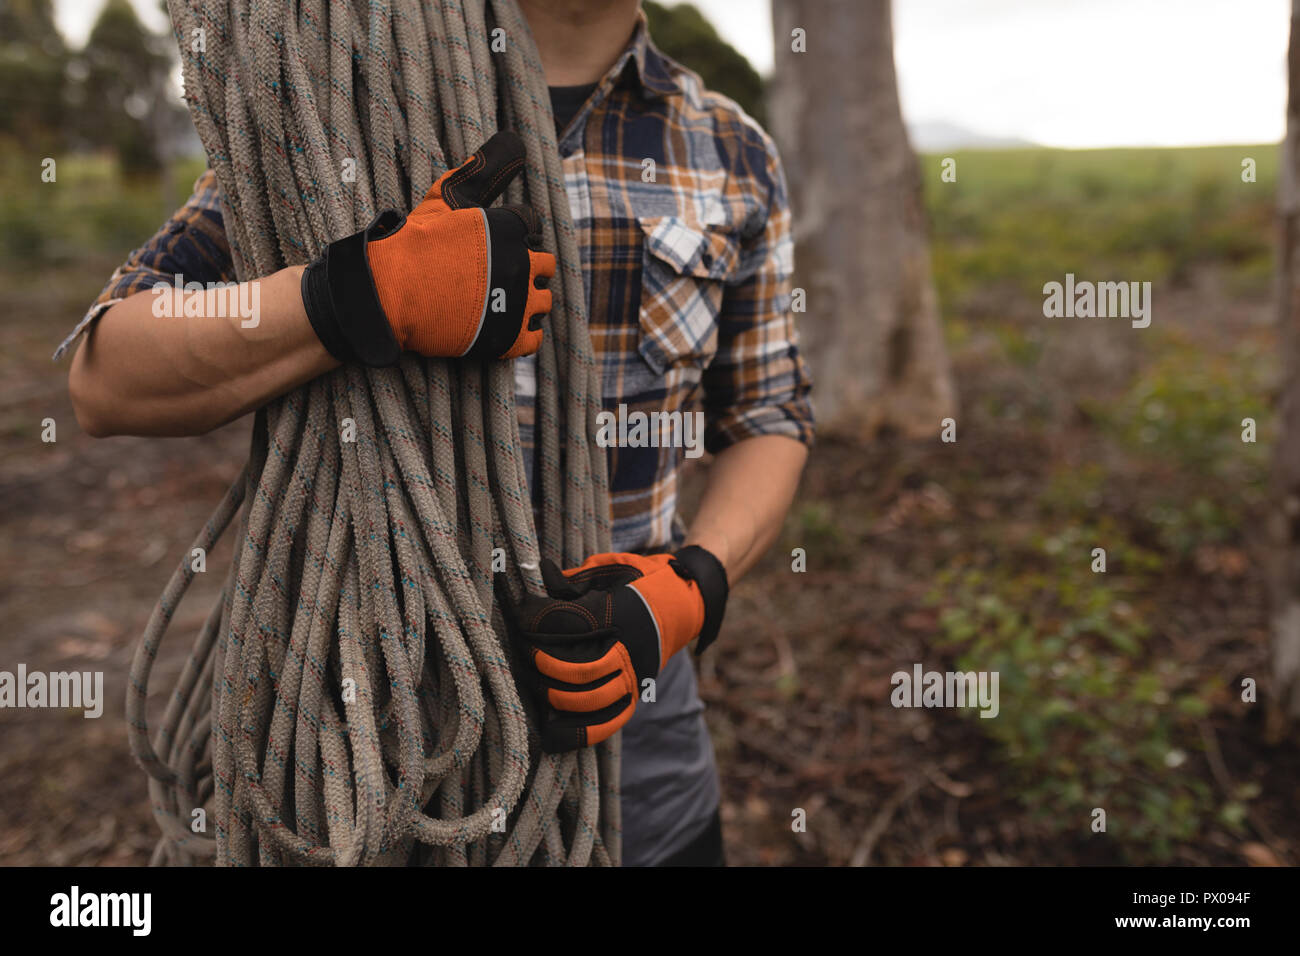 Lumberjack holding rope in forest Stock Photo